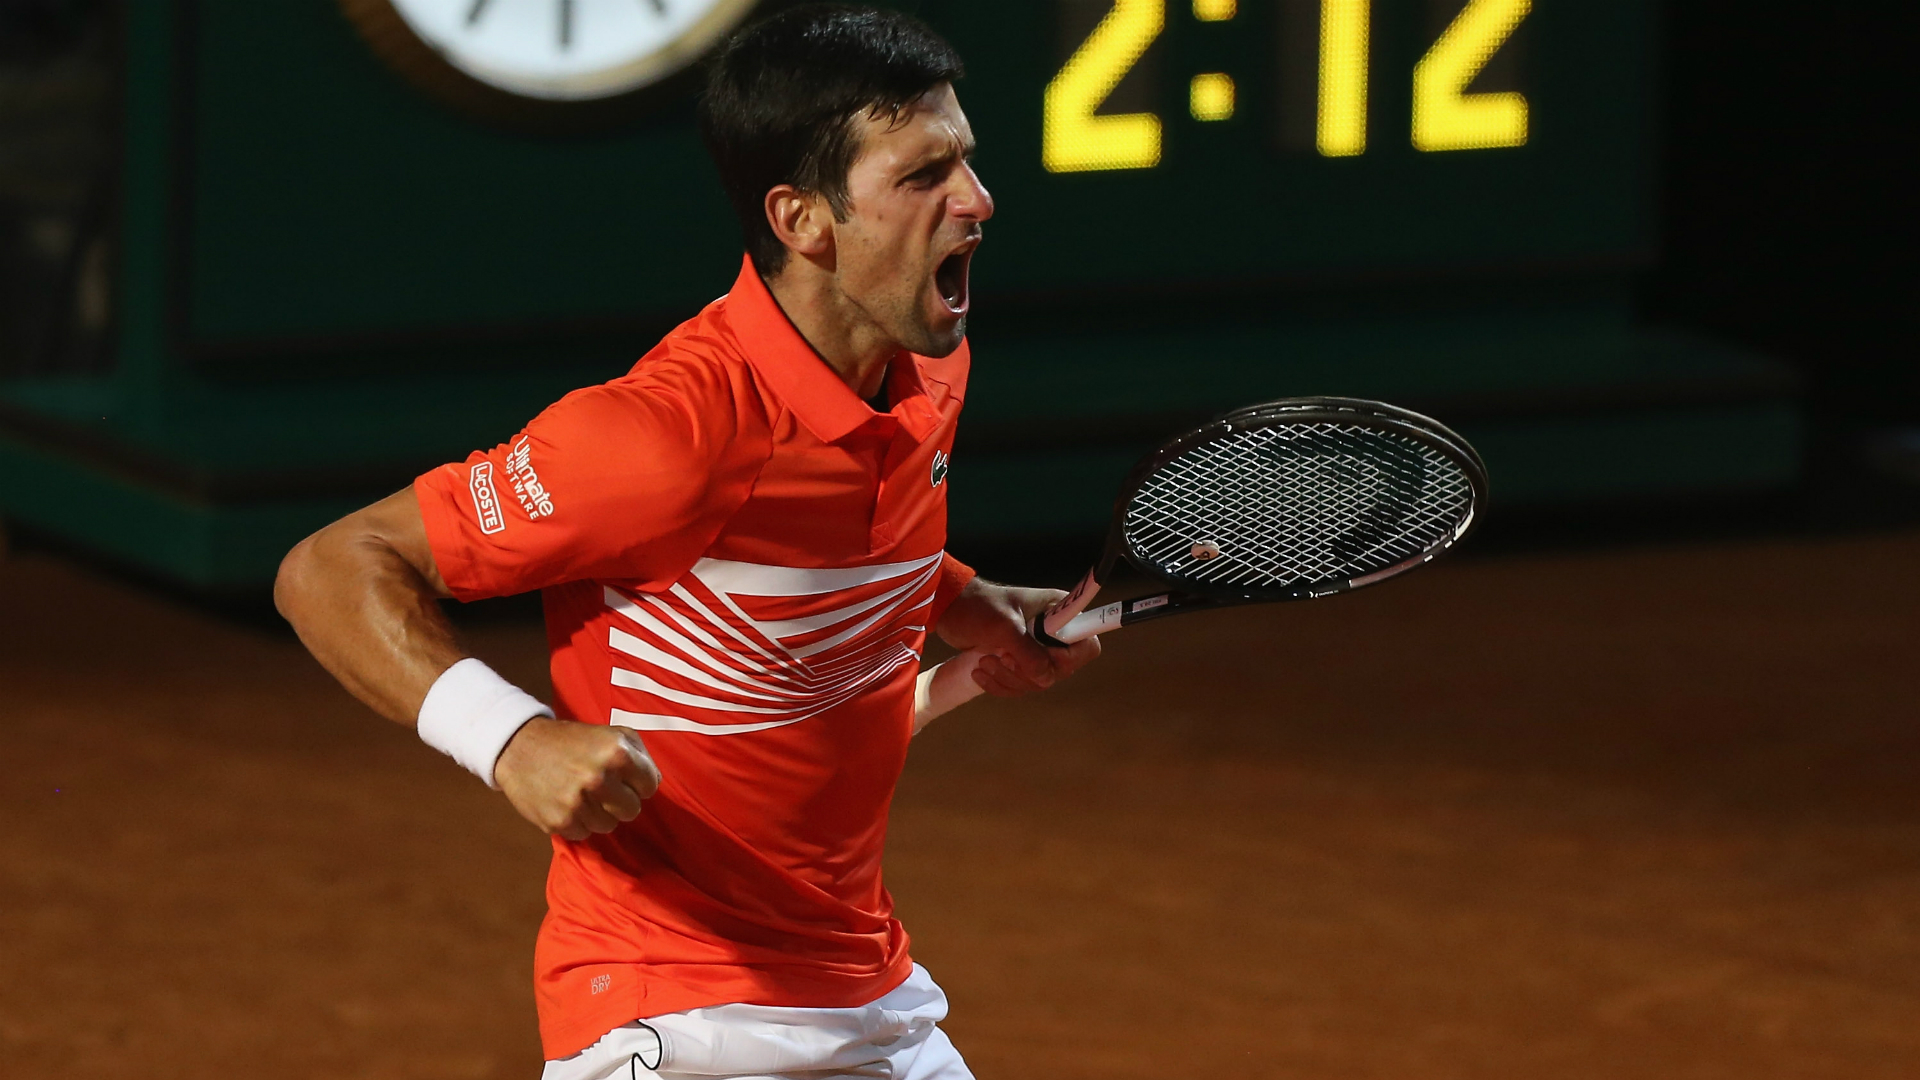 Top seed and four-time champion Novak Djokovic was always confident he could overcome Juan Martin del Potro in Rome on Friday.